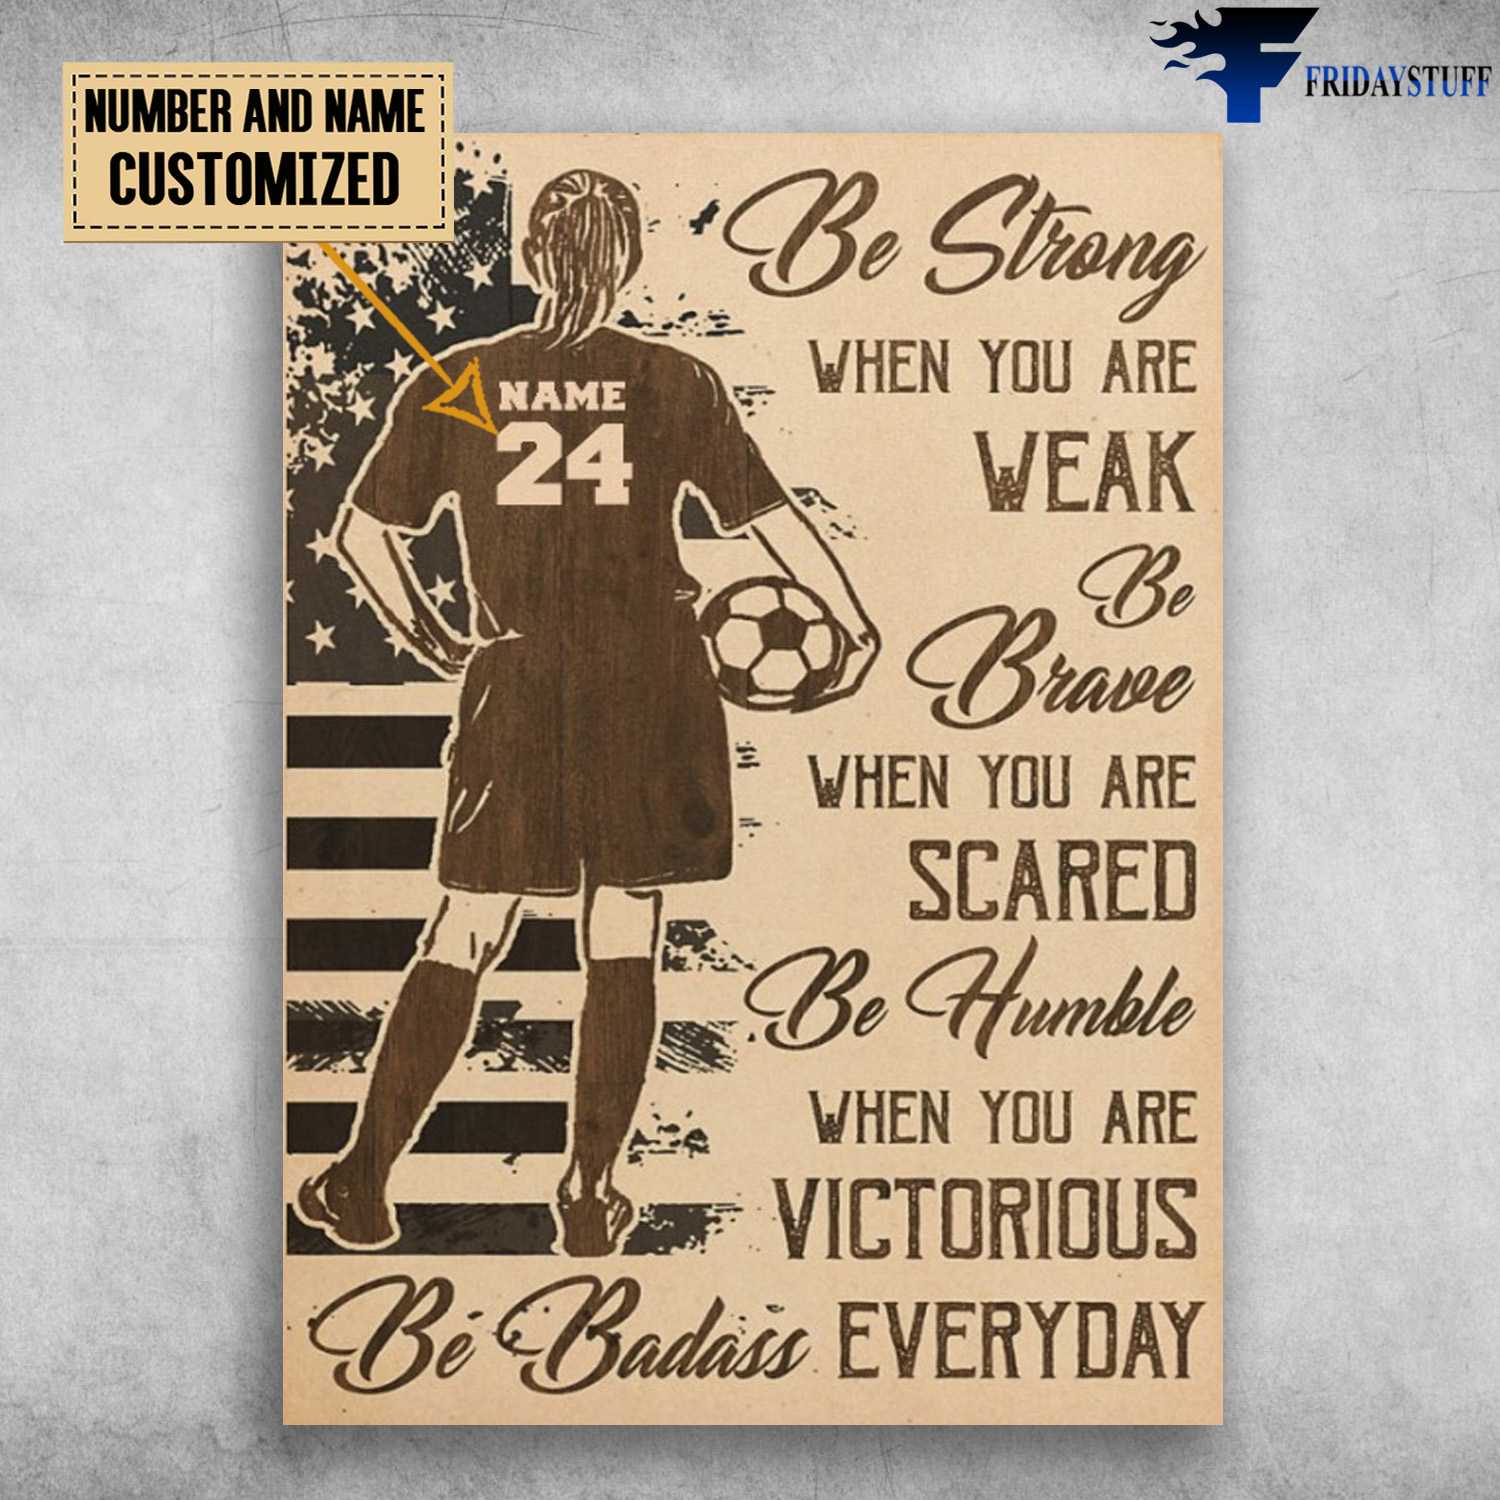 Soccer Poster, Girl Loves Soccer, Be Strong When You Are Weak, Be Brave When You Are Scared, Be Humble When You Are Victorious, Be Badass Everyday